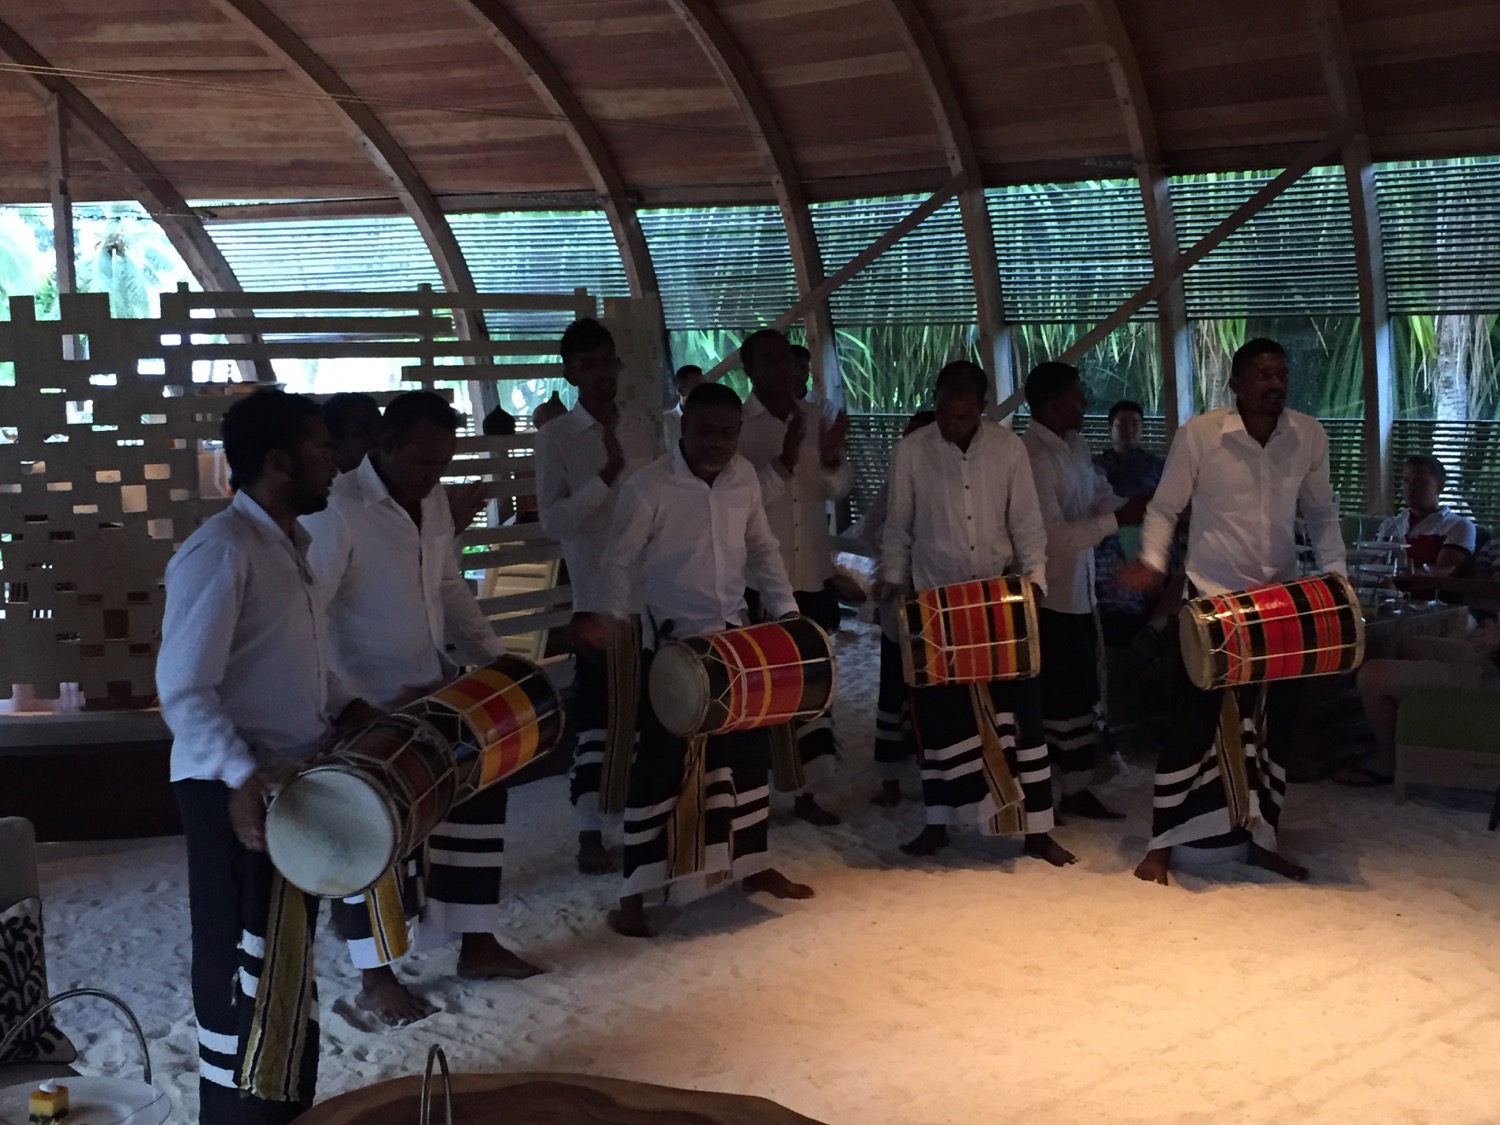 a group of men in white shirts holding drums